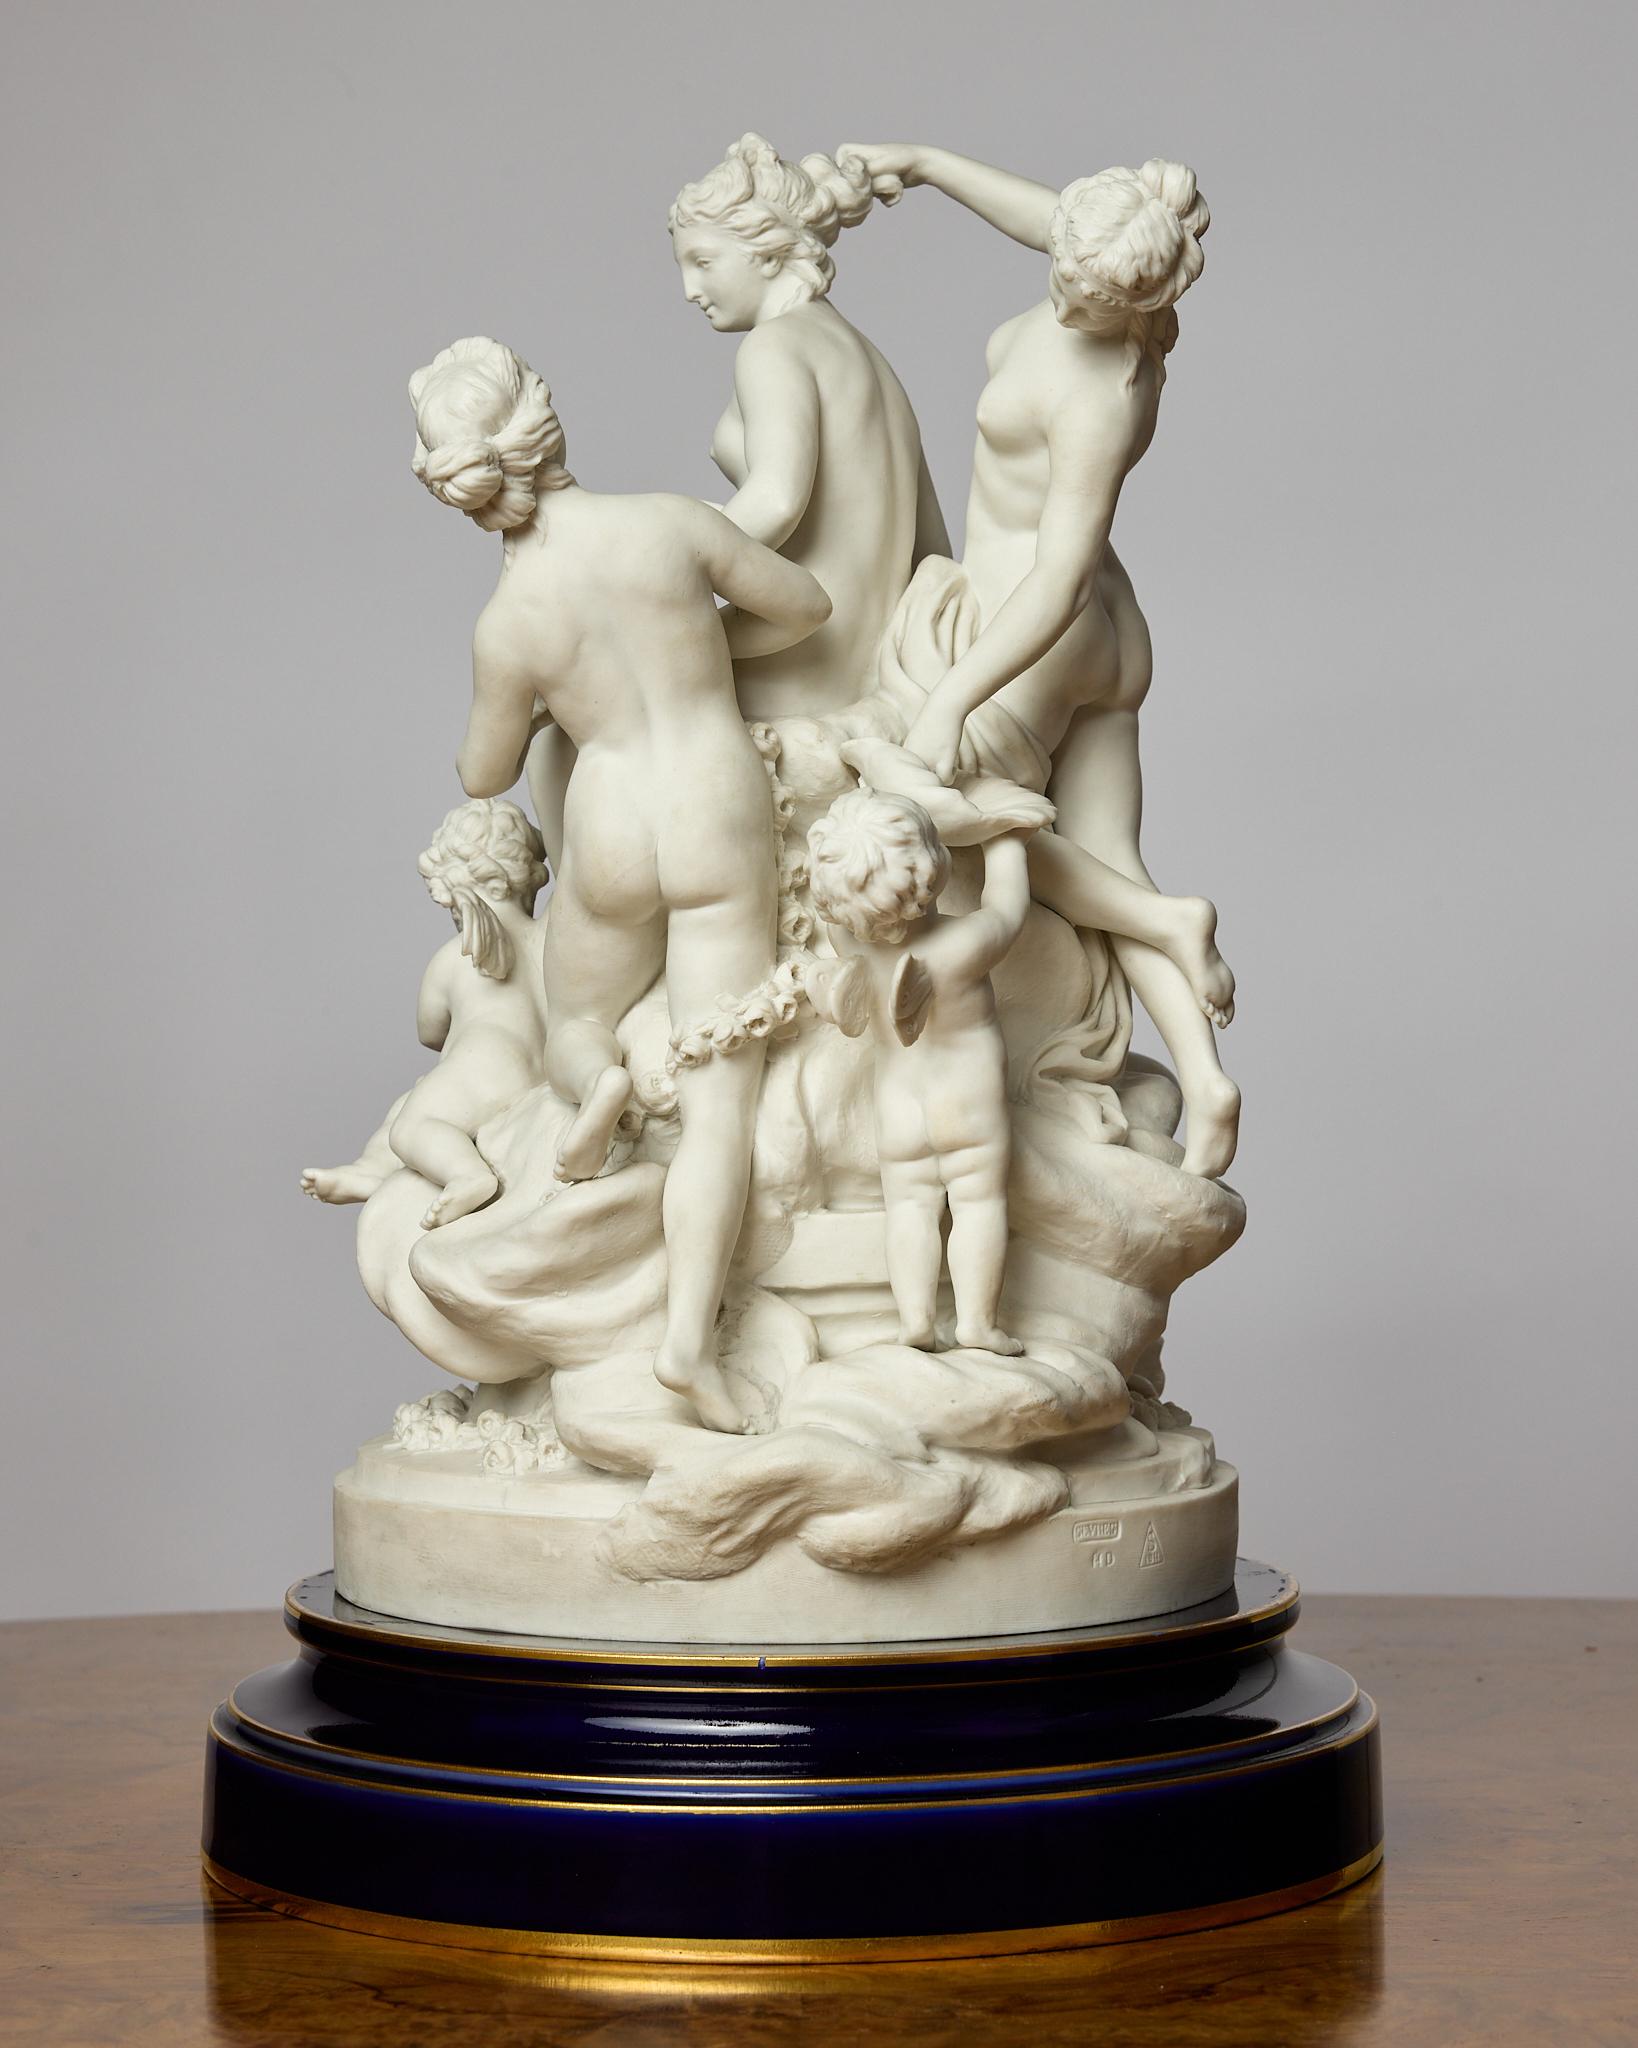 This is a stunning bisque fired porcelain figural group depicting the Toilet of Venus in the Louis XVI style. The sculpture was originally modelled by Louis-Simon Boizot (French, 1743-1809). 
Venus sits surrounded by three attendants and two putti,